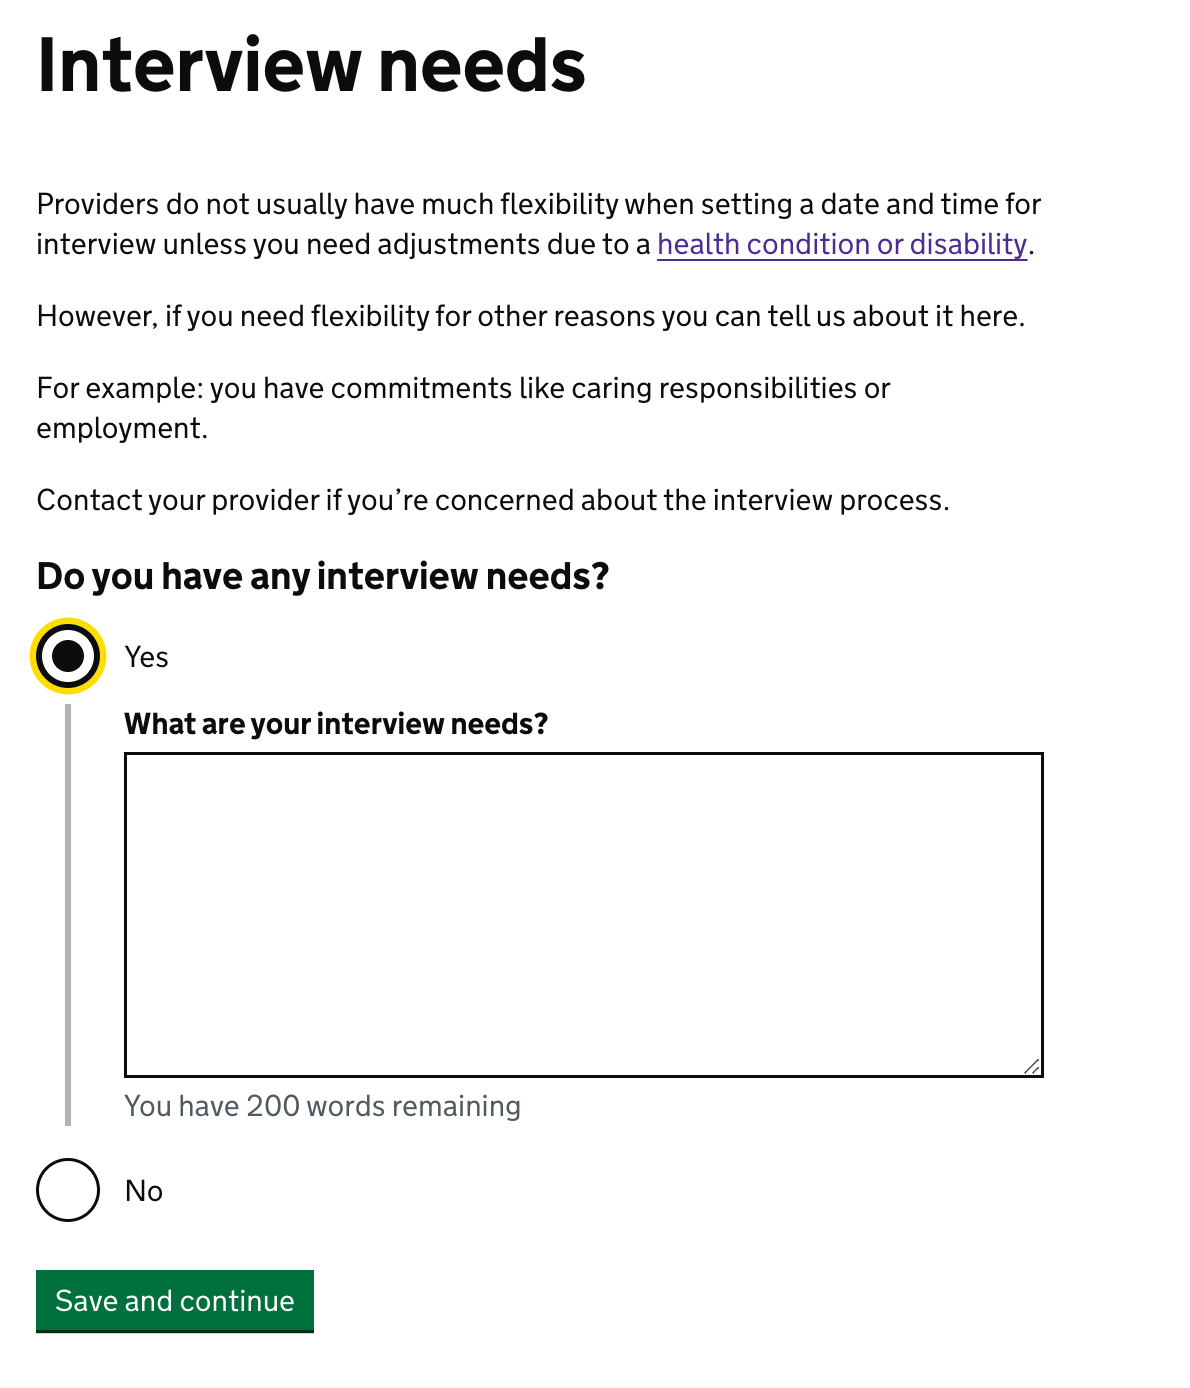 Screenshot showing a page with the old 'Interview needs' question with information about COVID-19 and how providers are not flexible with interview dates. The questions asl reads, 'Do you have any interview needs?'.